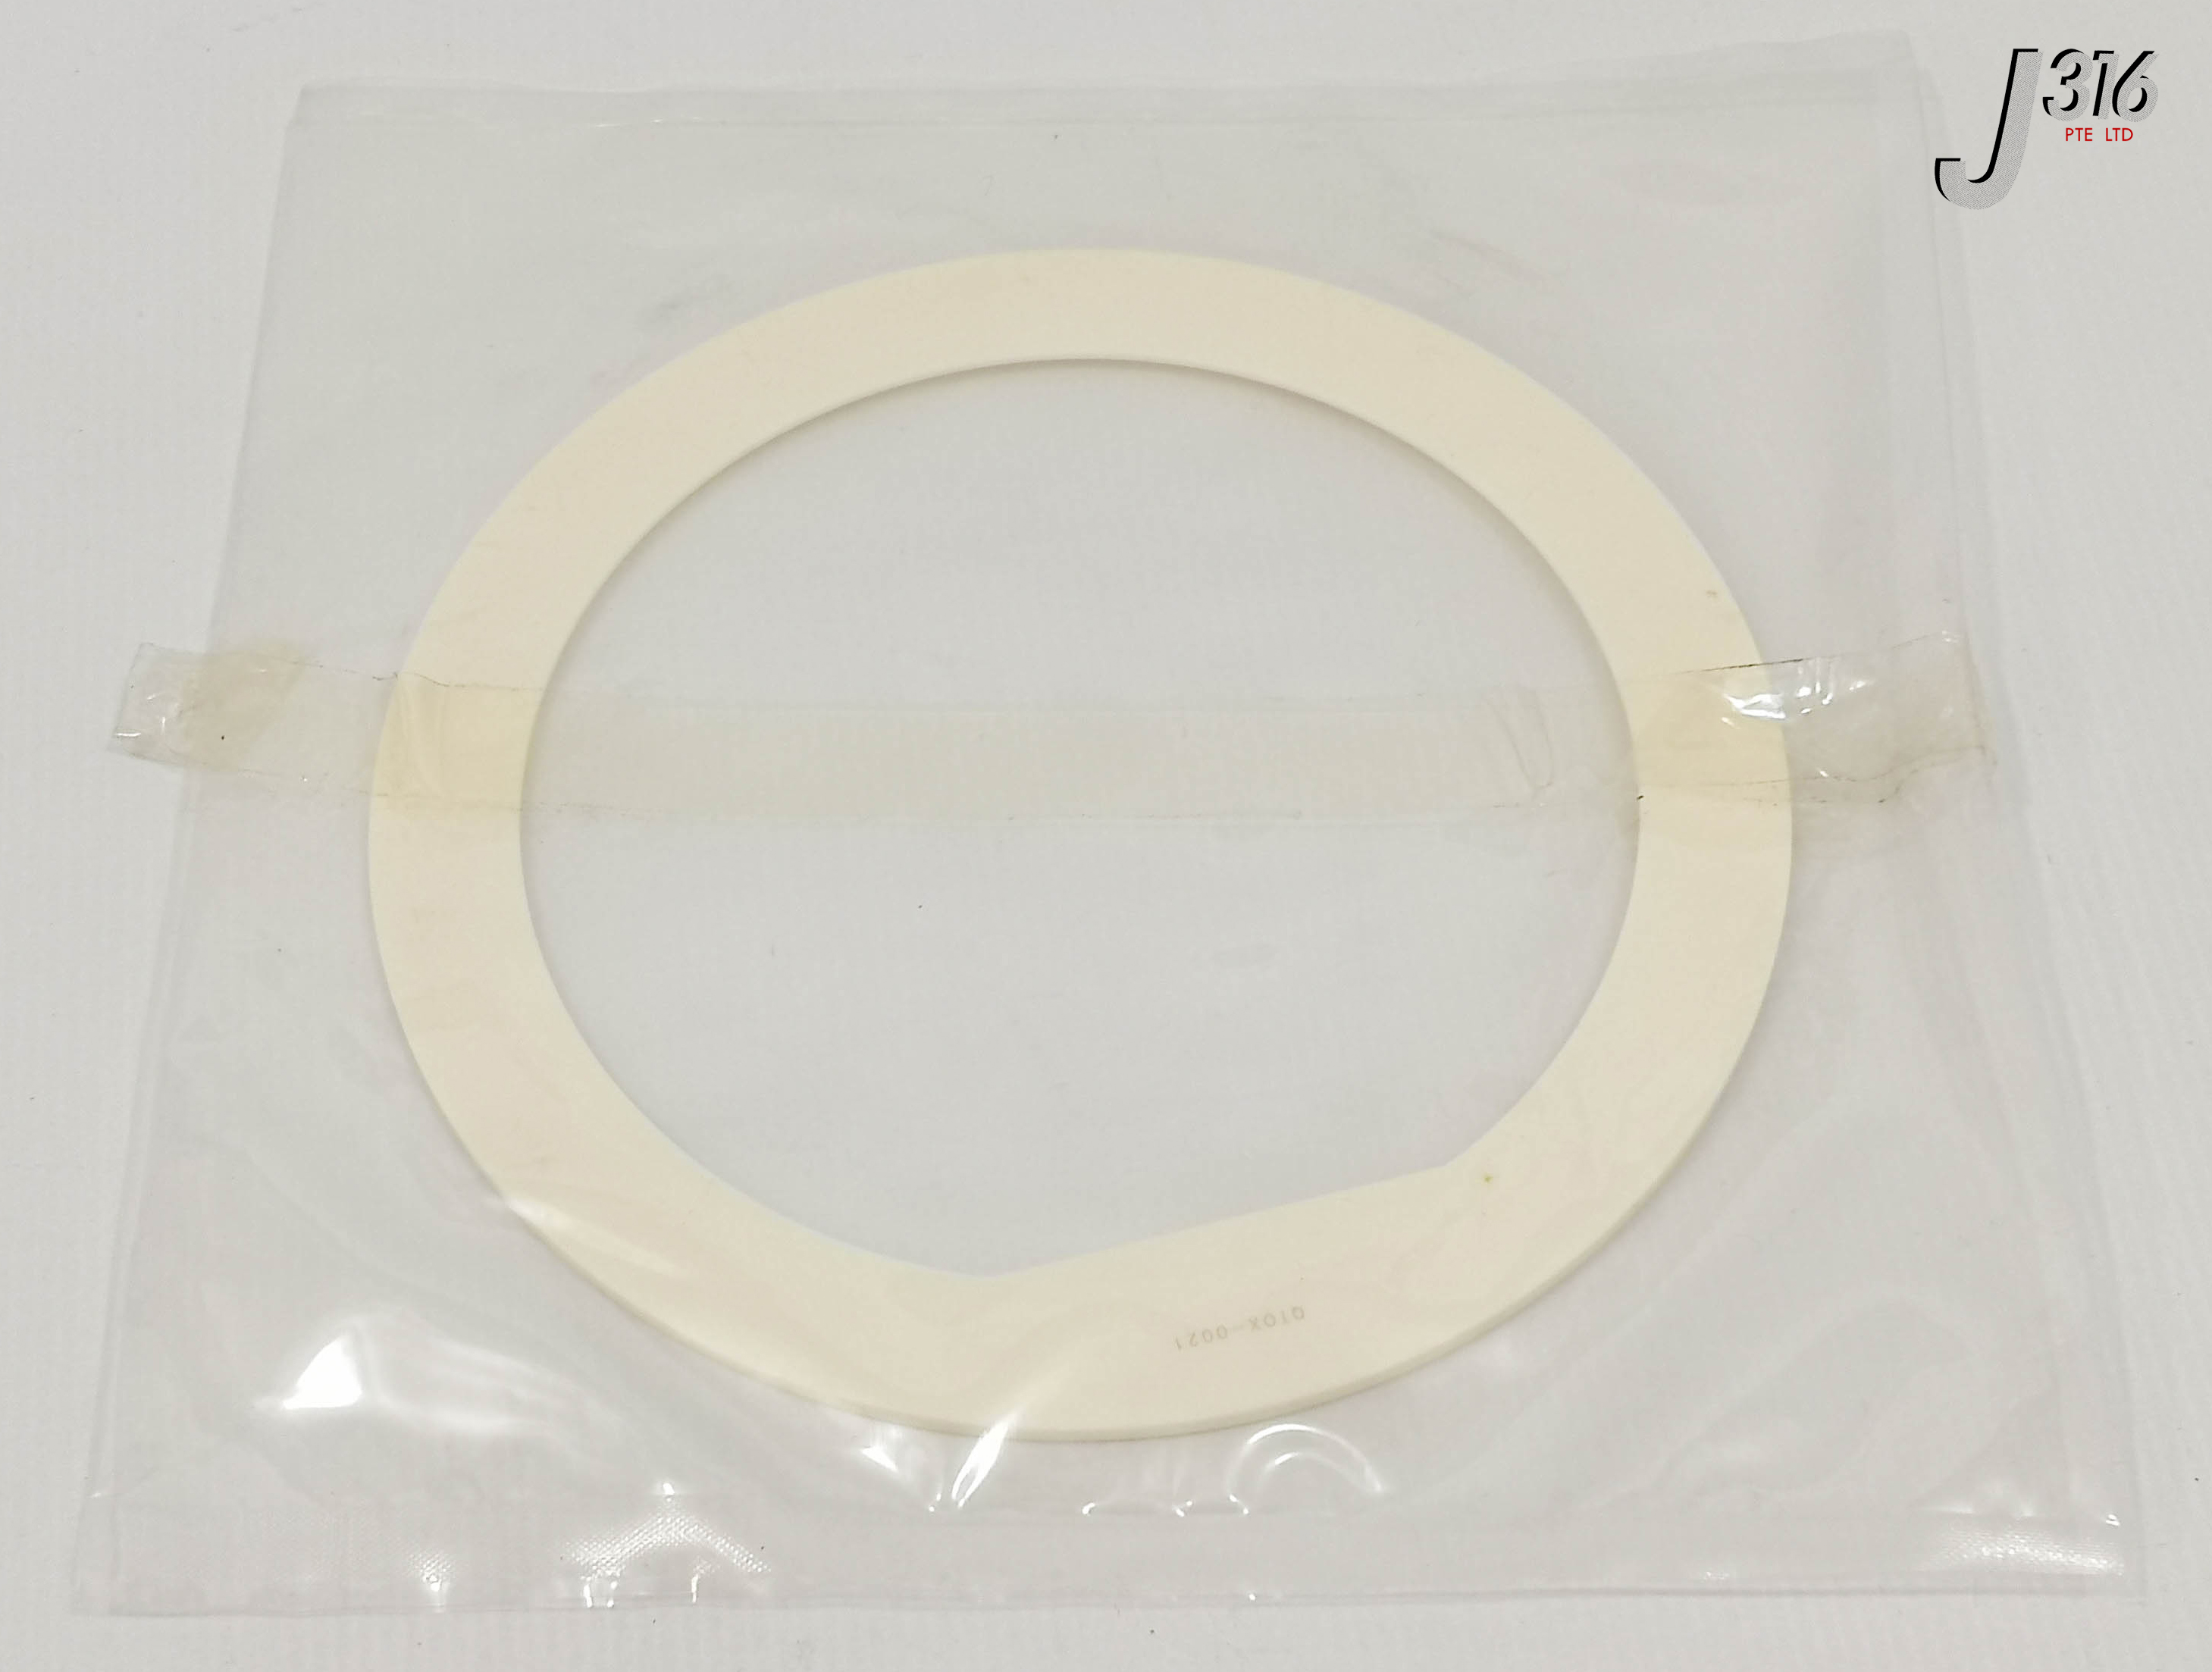 15529 LAM RESEARCH 6″HOT EDGE RING (NEW) 716-140163-001 – J316Gallery